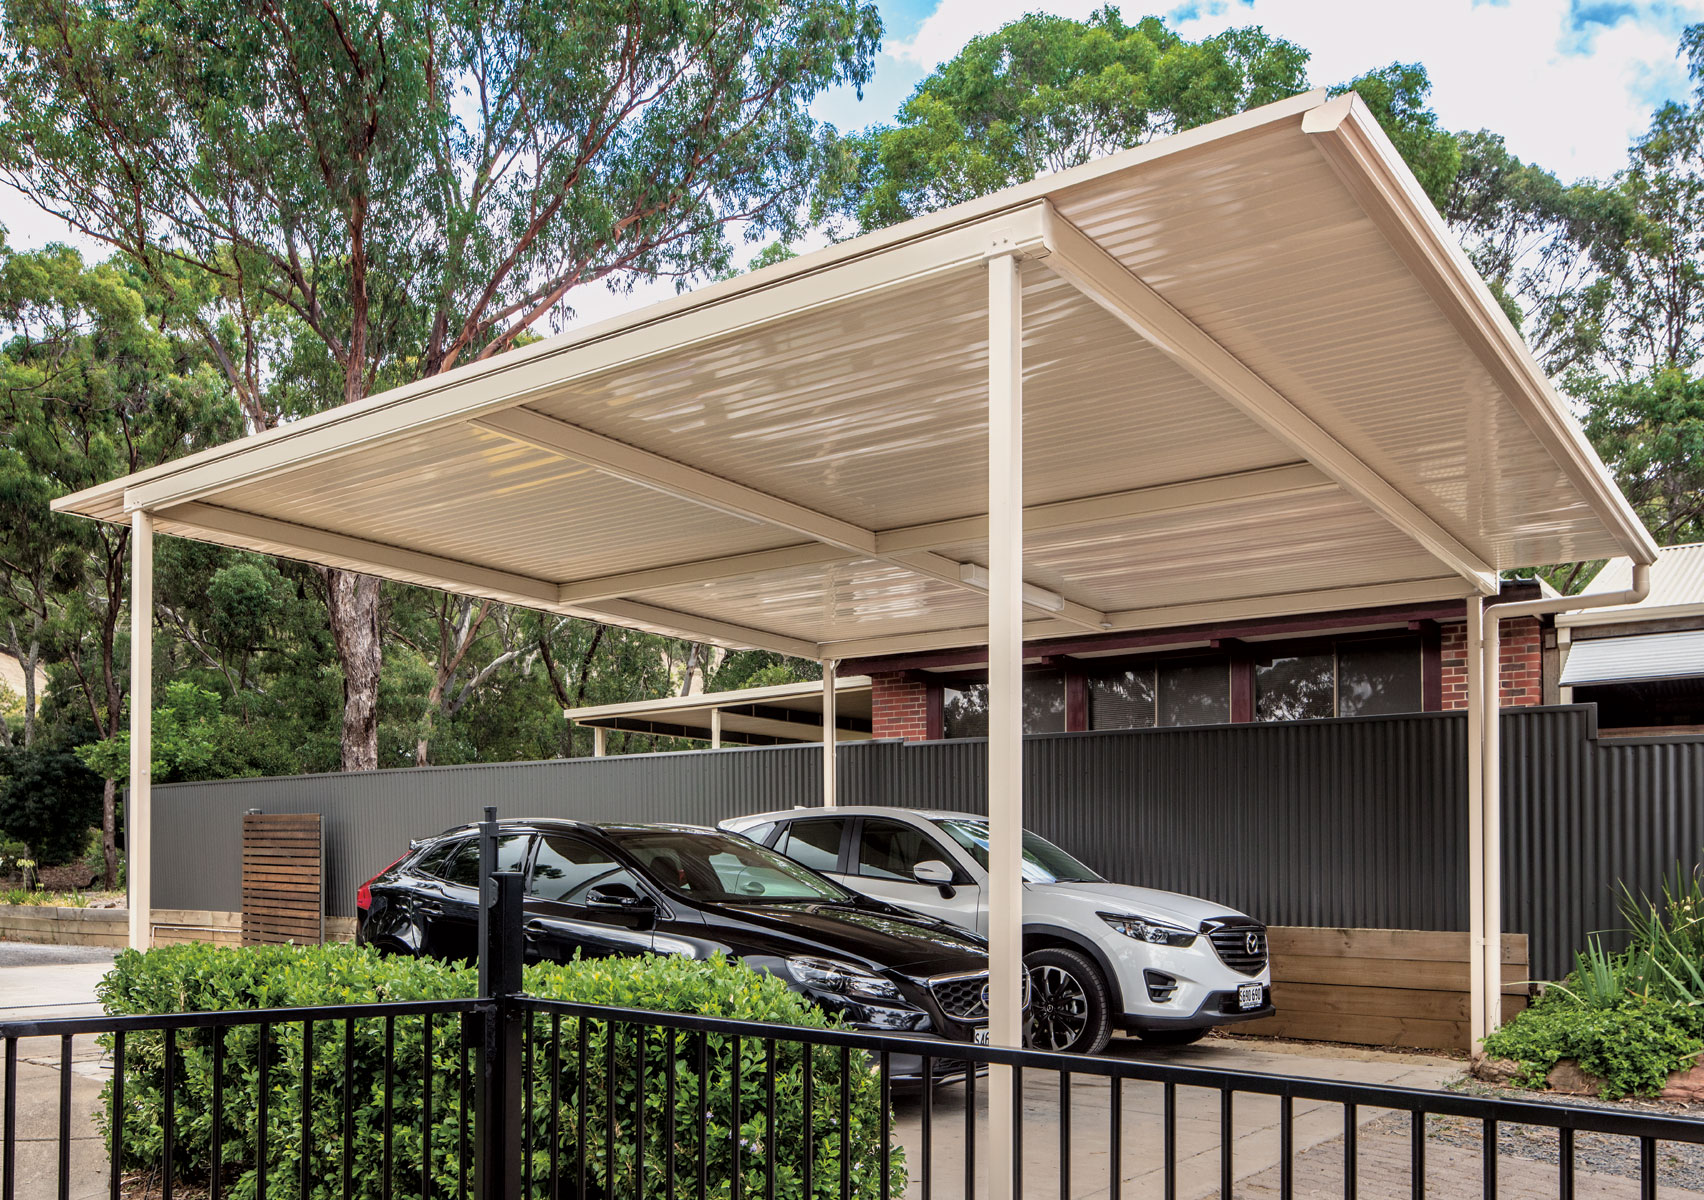 How do these outdoor solutions protect your vehicle and home investments?